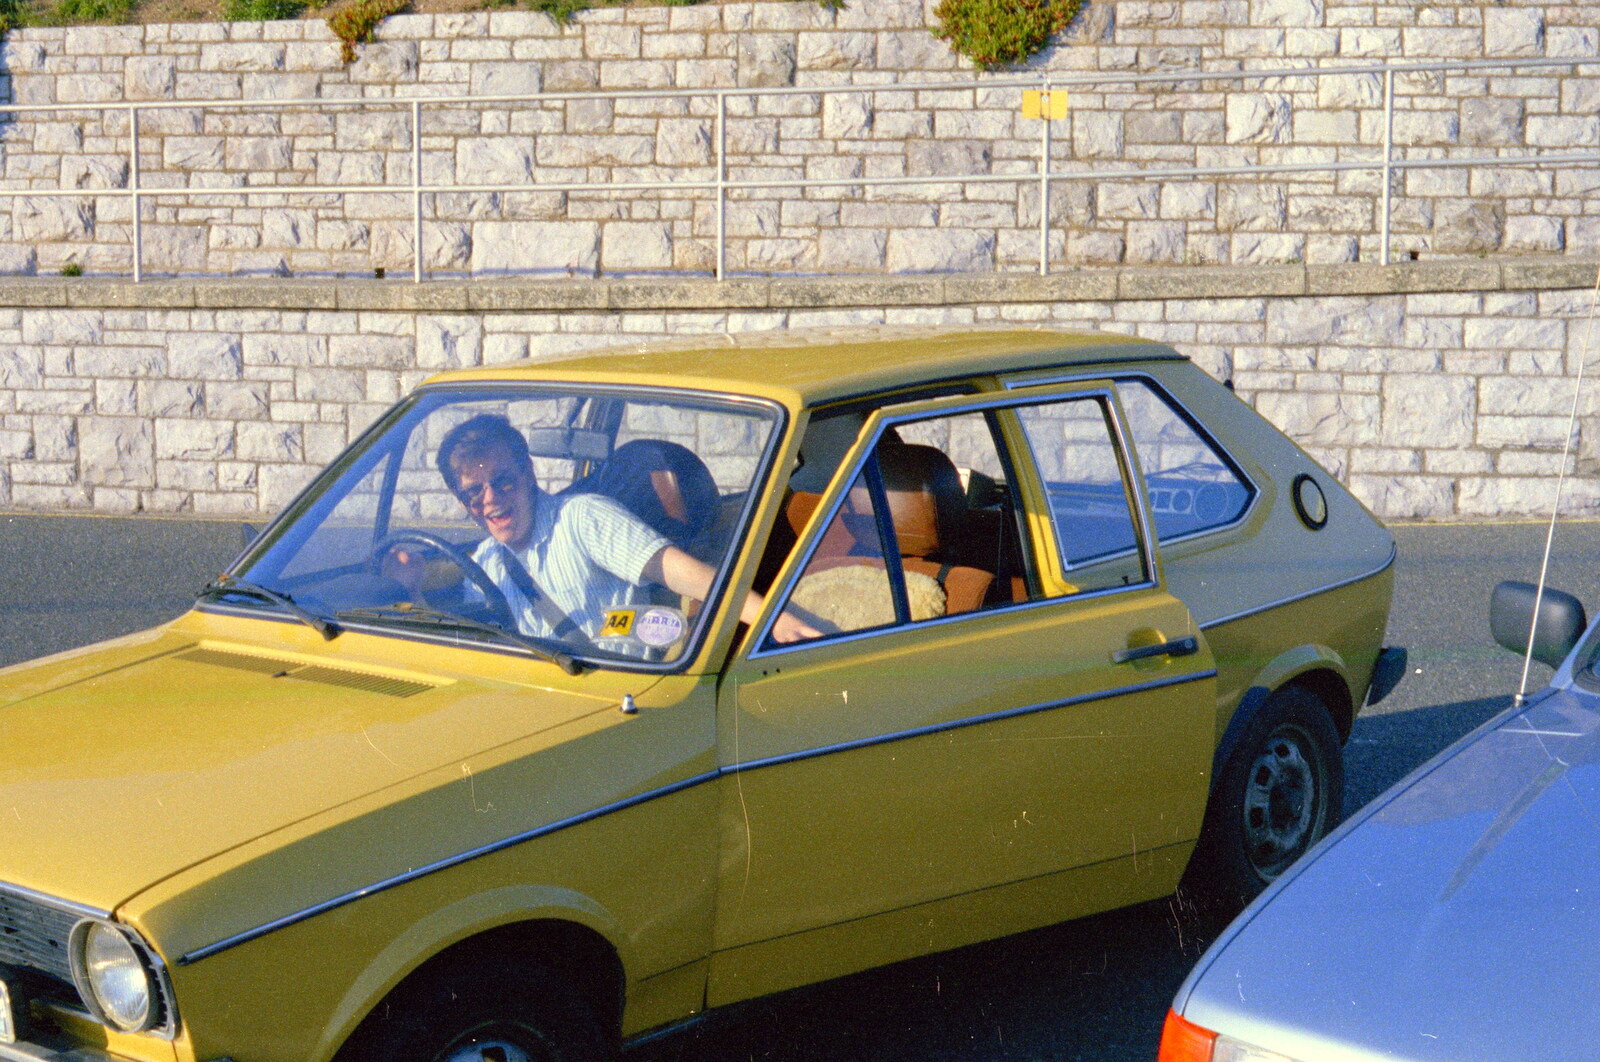 Dave Lock and his beloved yellow Polo from Uni: Student Politics, and Hanging Around The Hoe, Plymouth - 12th April 1986